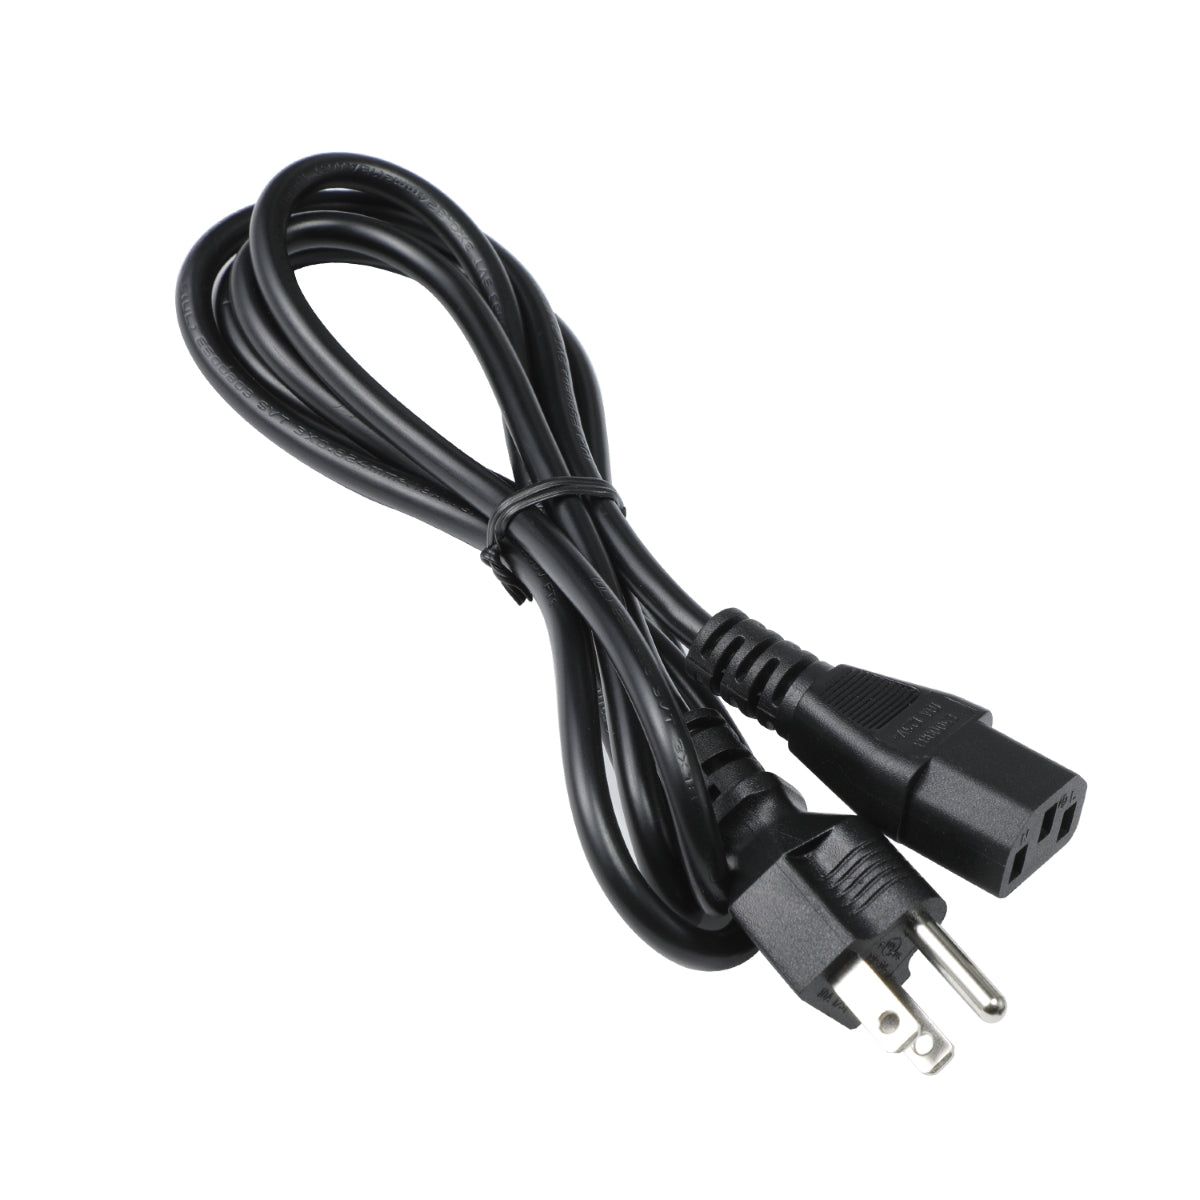 Power Cord for ViewSonic TD2421 Monitor